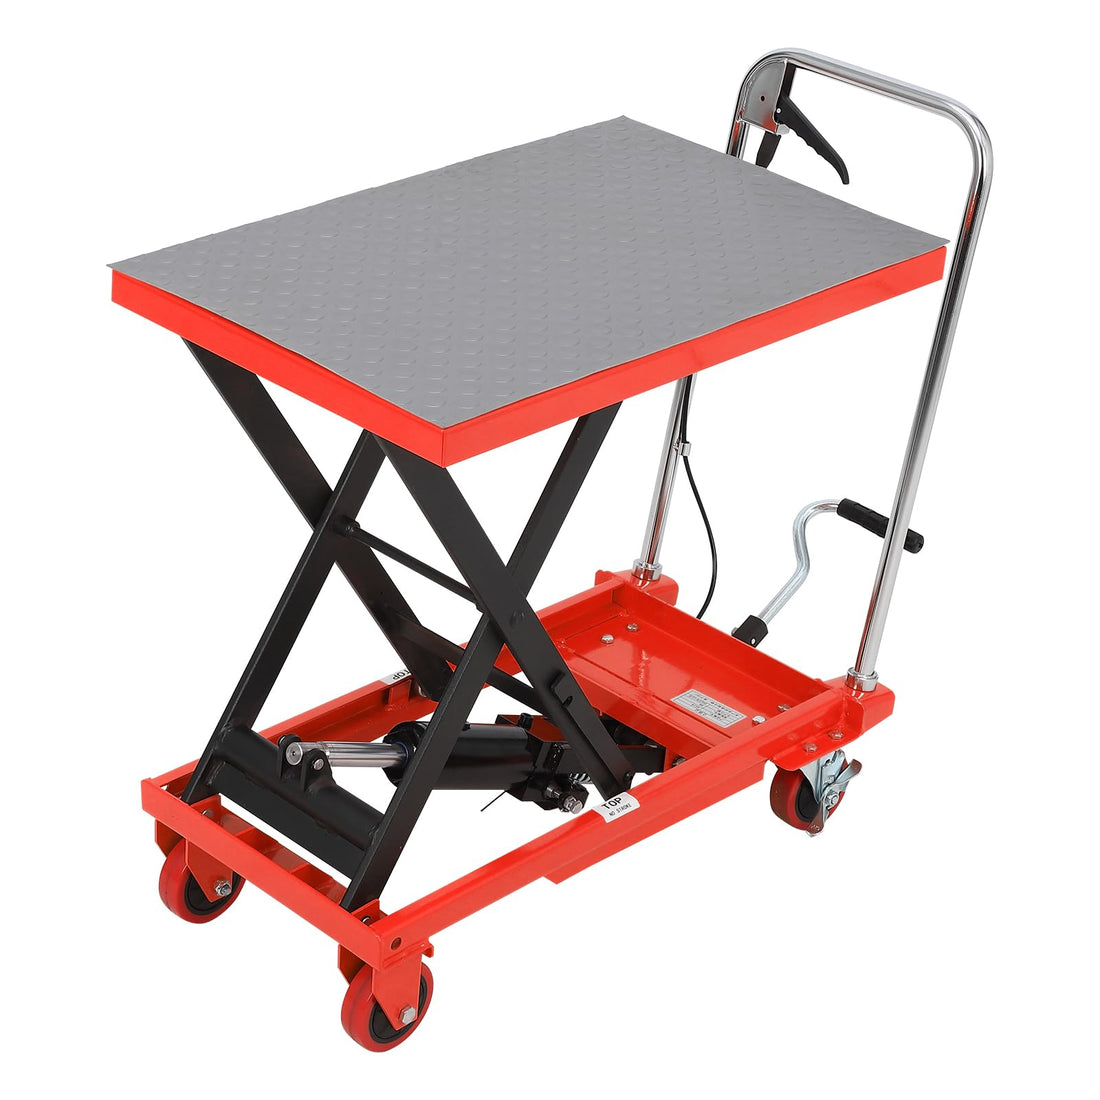 Hydraulic Lift Table Cart 500lbs, Lift Table Capacity 28.5 Inch Lifting Height, Manual Single Scissor with 4 Wheels and Non-Slip Pad Thickness 3mm for Material Handling and Transportation